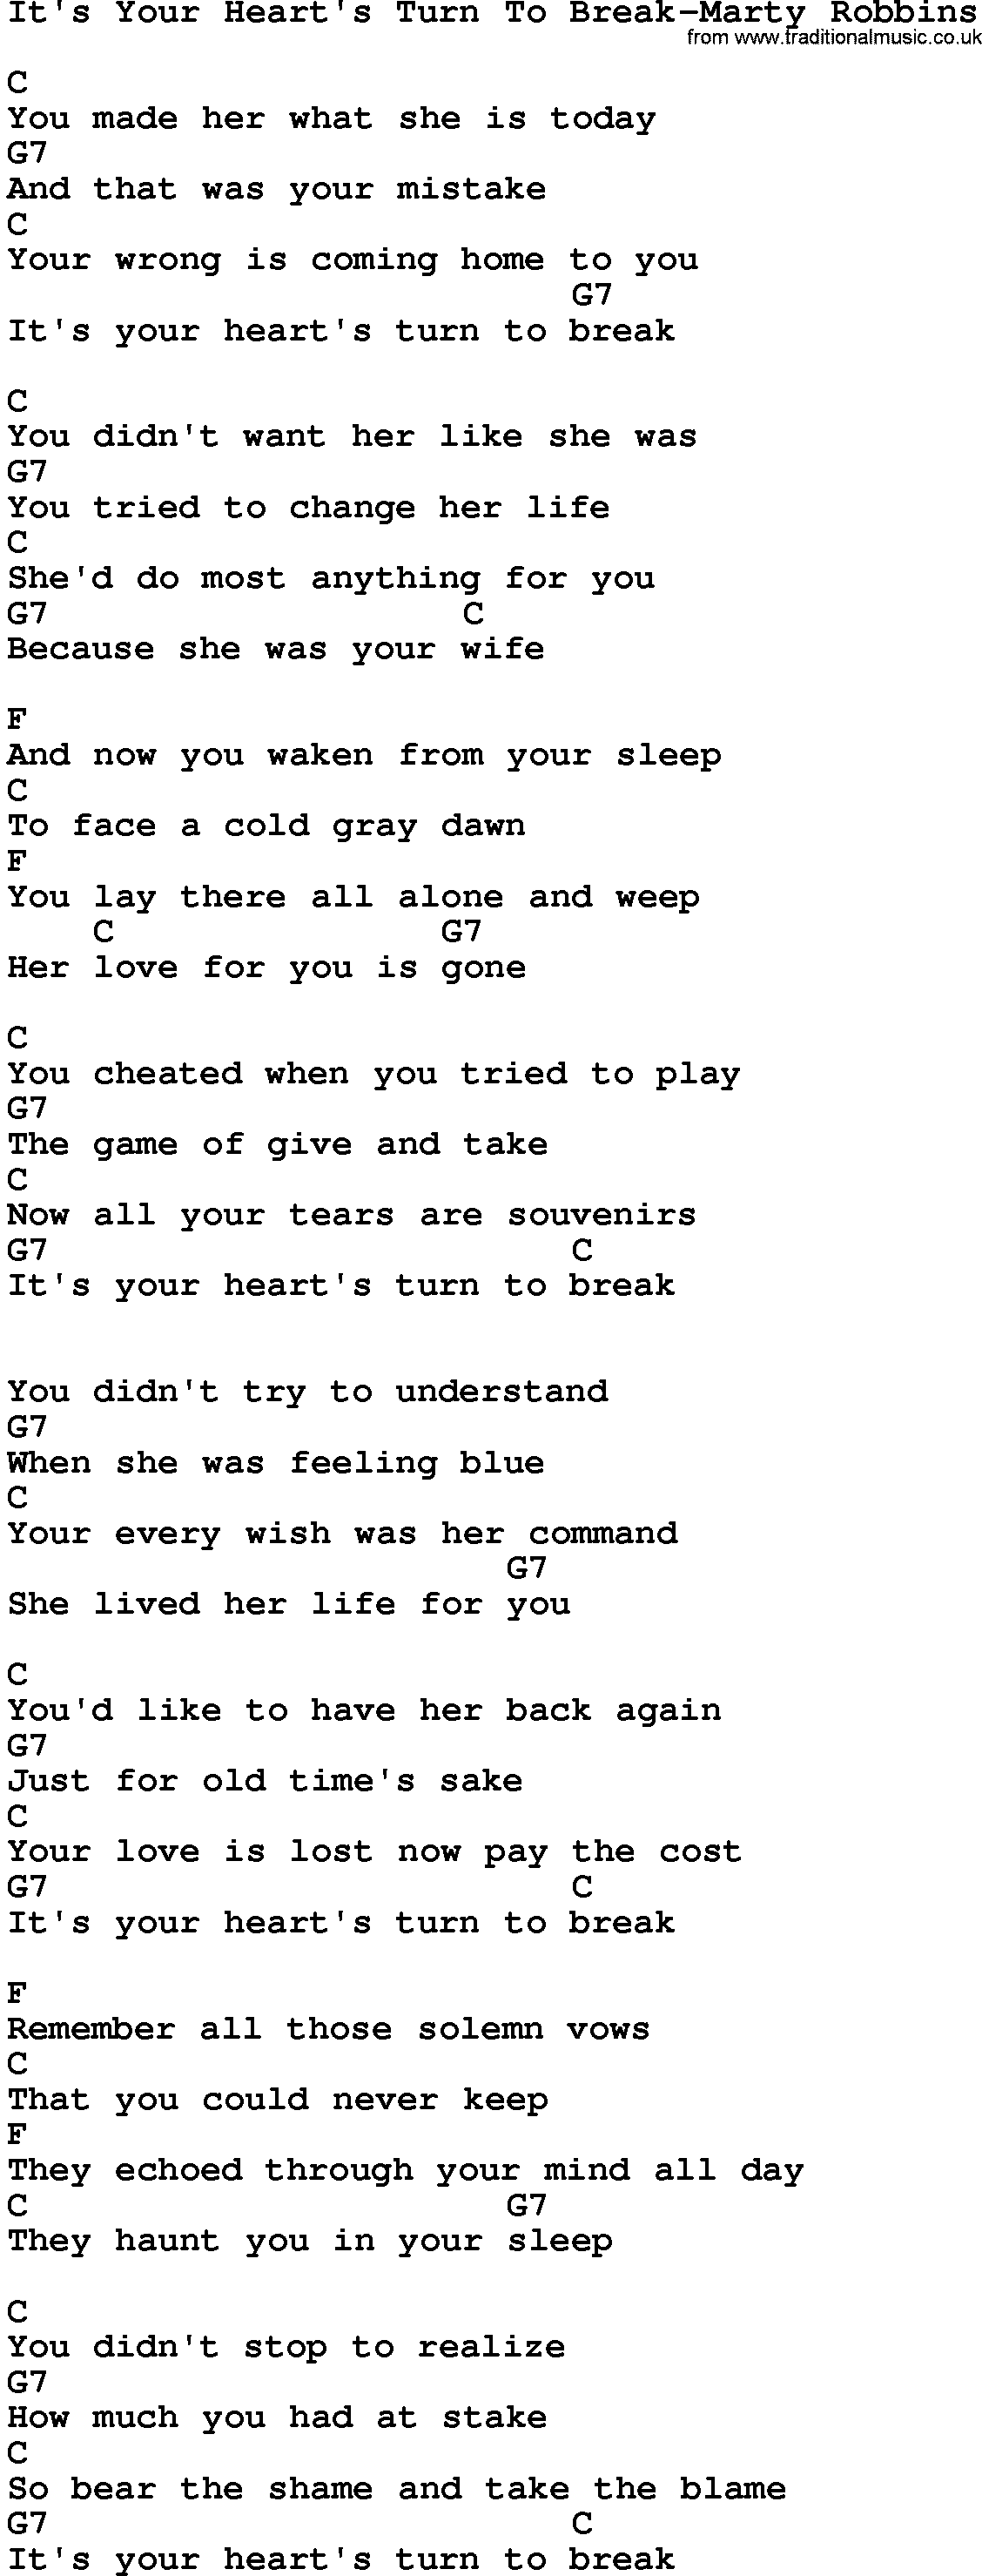 Country music song: It's Your Heart's Turn To Break-Marty Robbins lyrics and chords